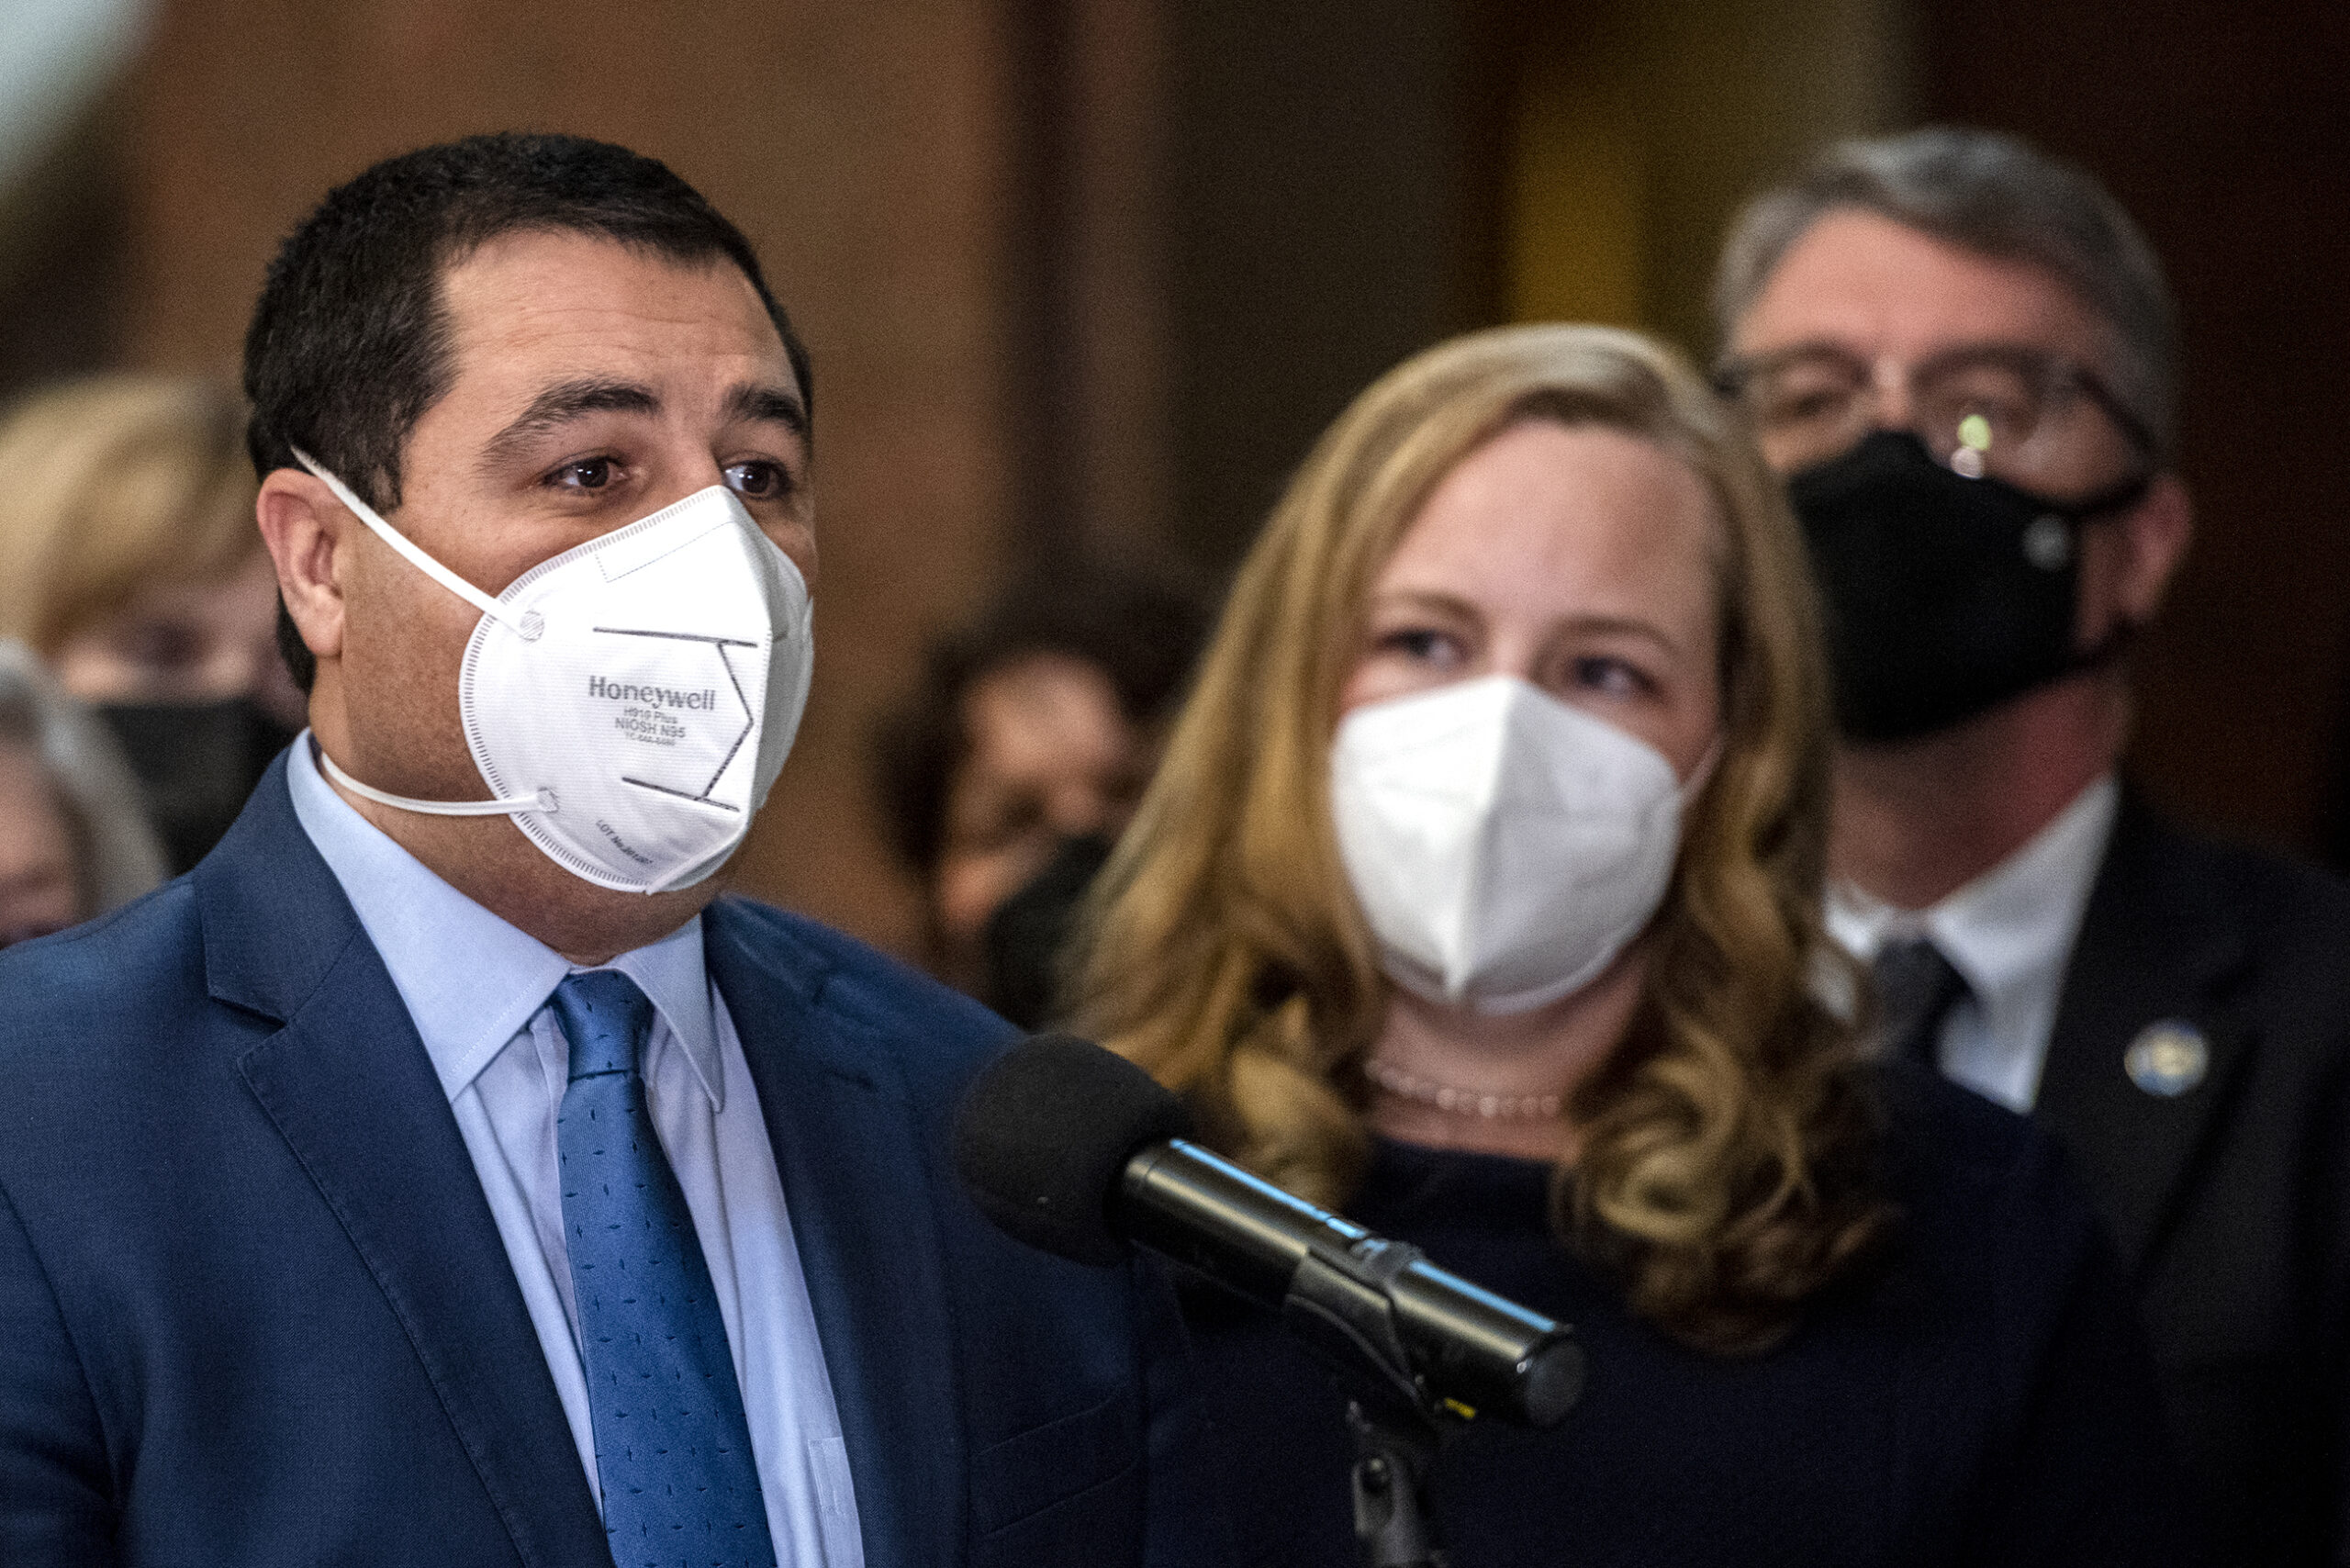 Josh Kaul wears a mask as he speaks at a podium.